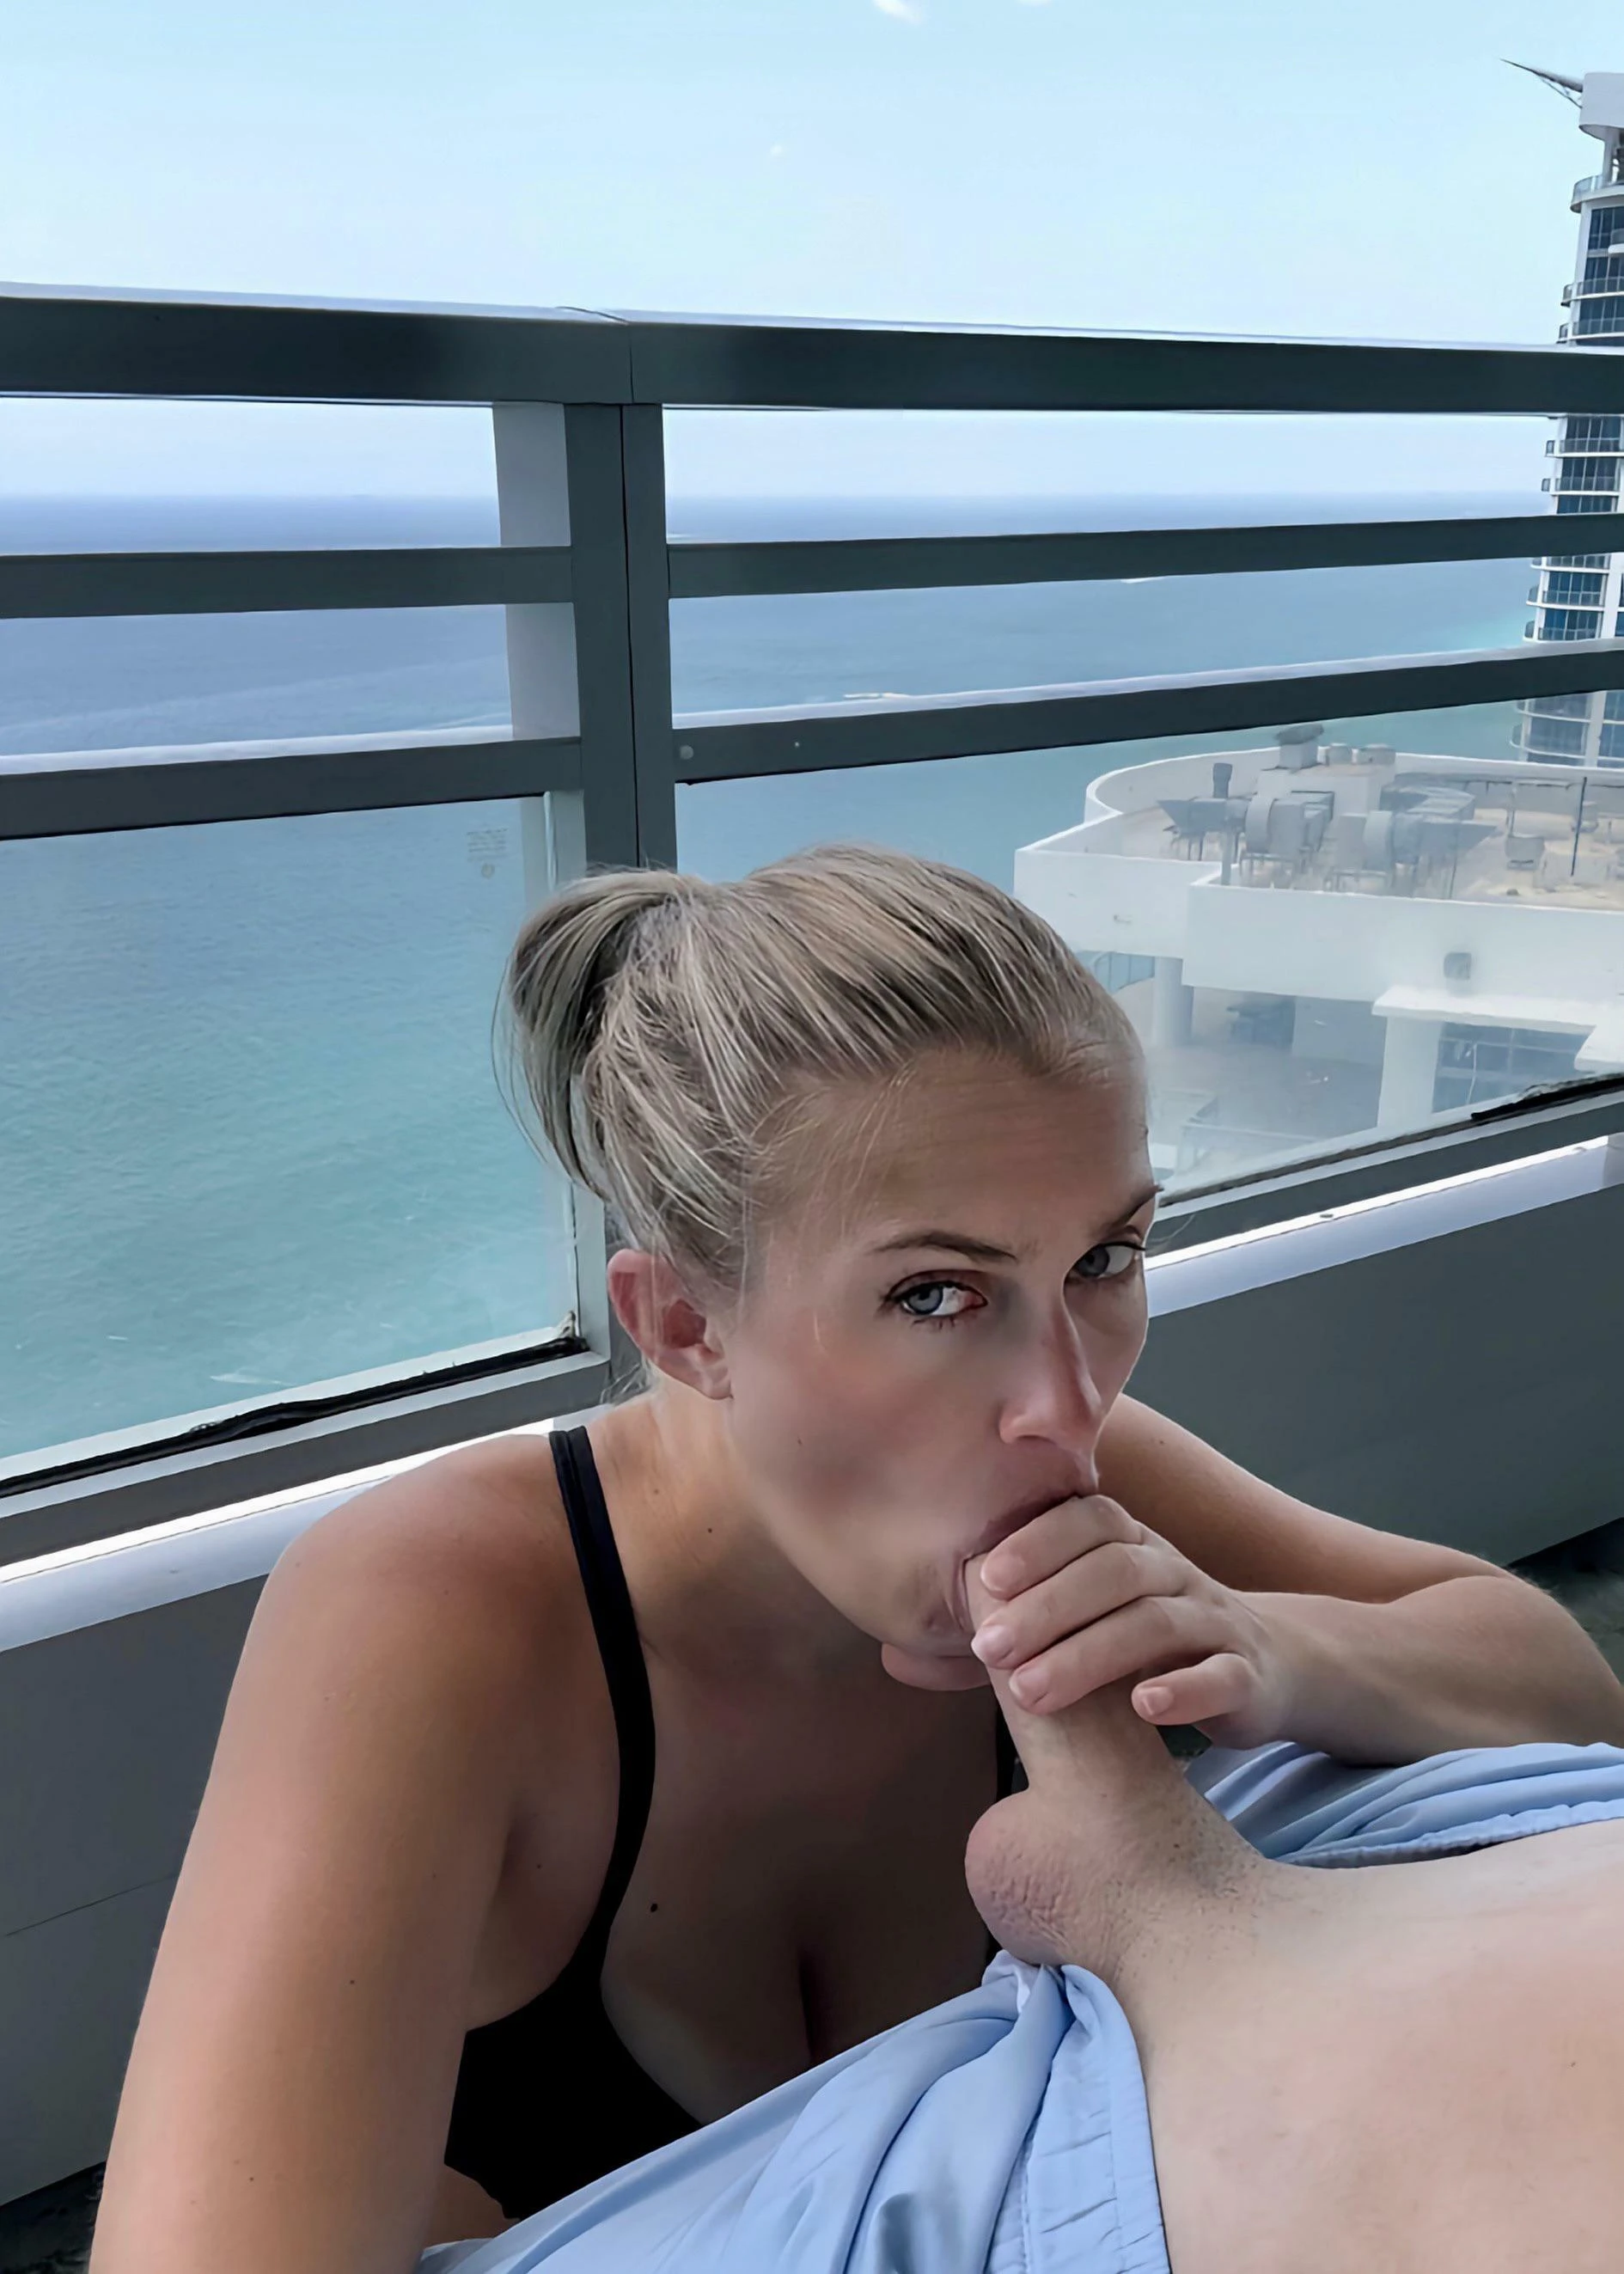 I wonder how many people watched me suck dick on vacation?